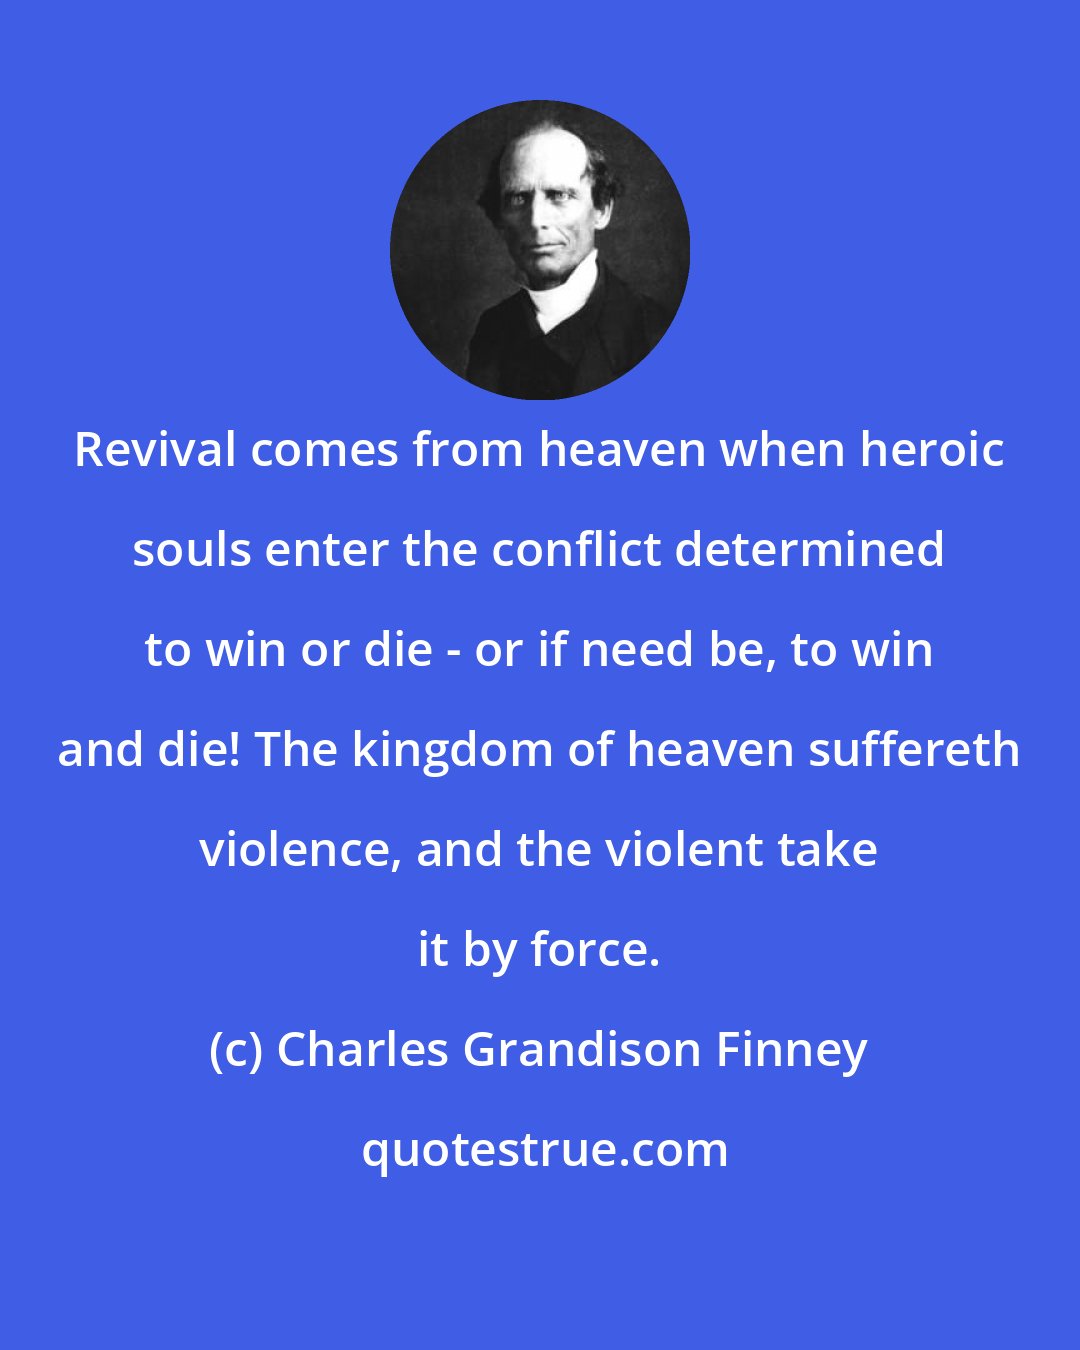 Charles Grandison Finney: Revival comes from heaven when heroic souls enter the conflict determined to win or die - or if need be, to win and die! The kingdom of heaven suffereth violence, and the violent take it by force.